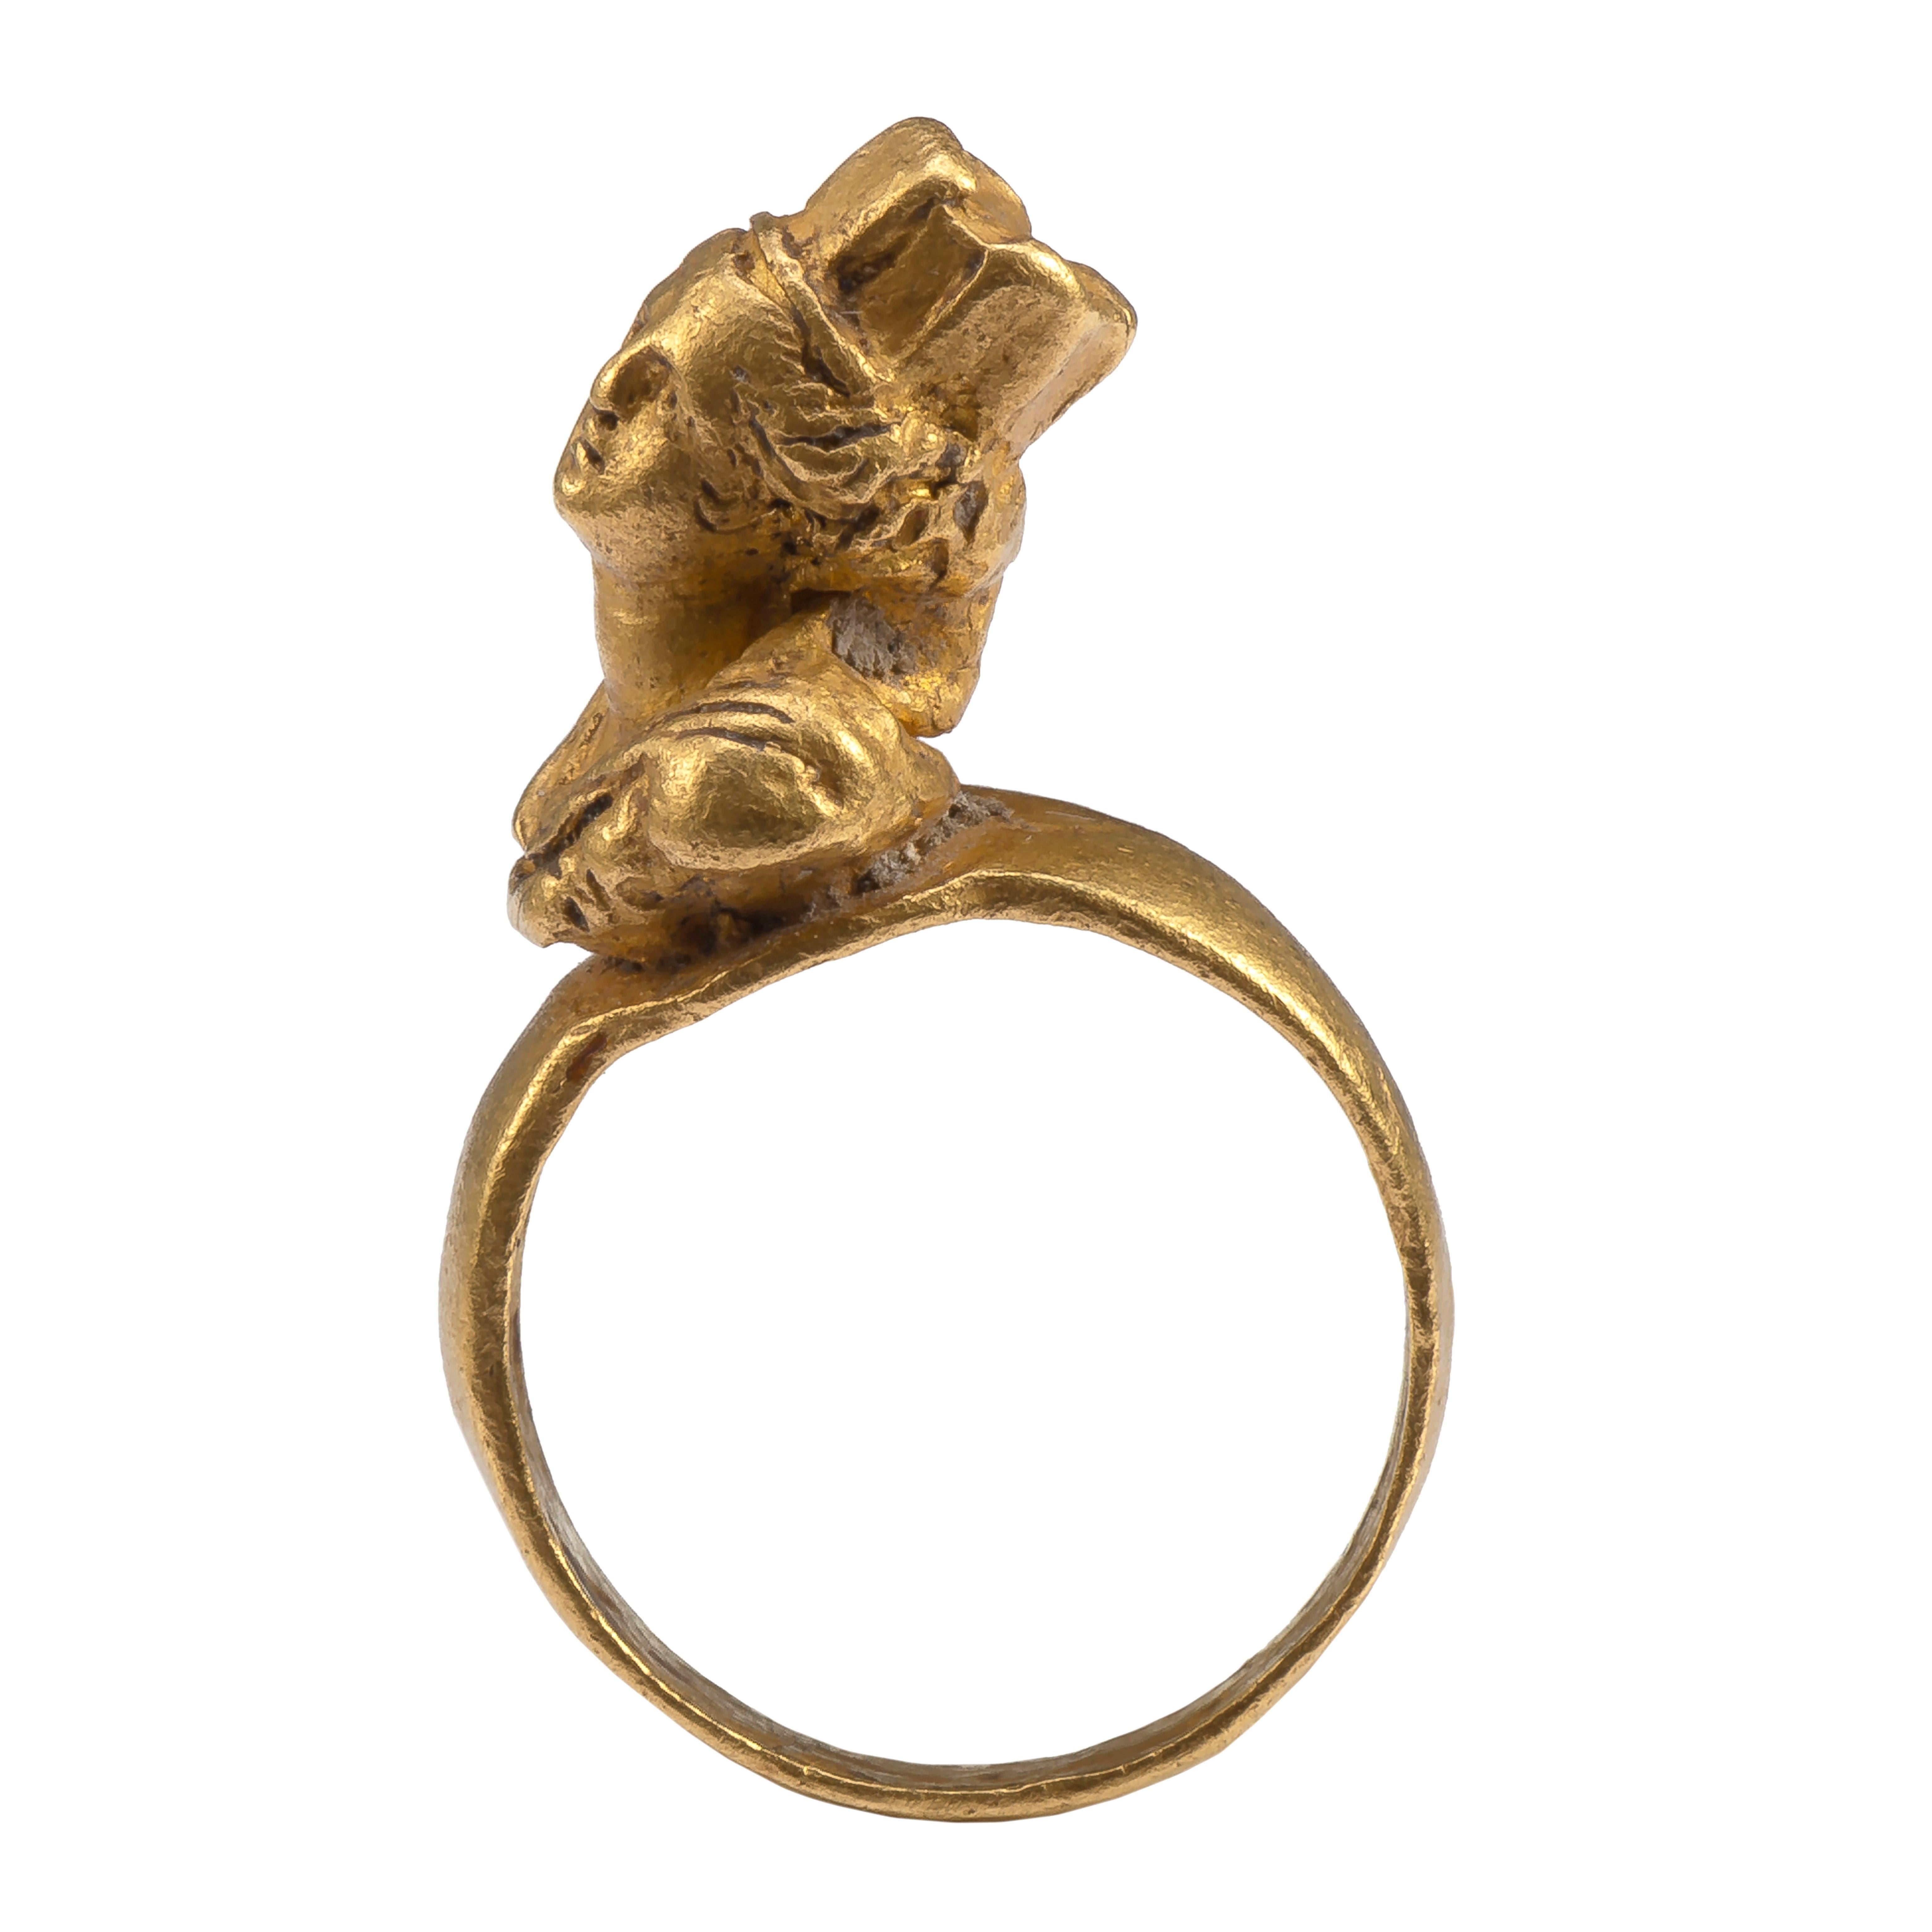 Classical Roman Ancient Gold Roman Ring with Bust of Tyche 'circa late 1st - 2nd century CE'